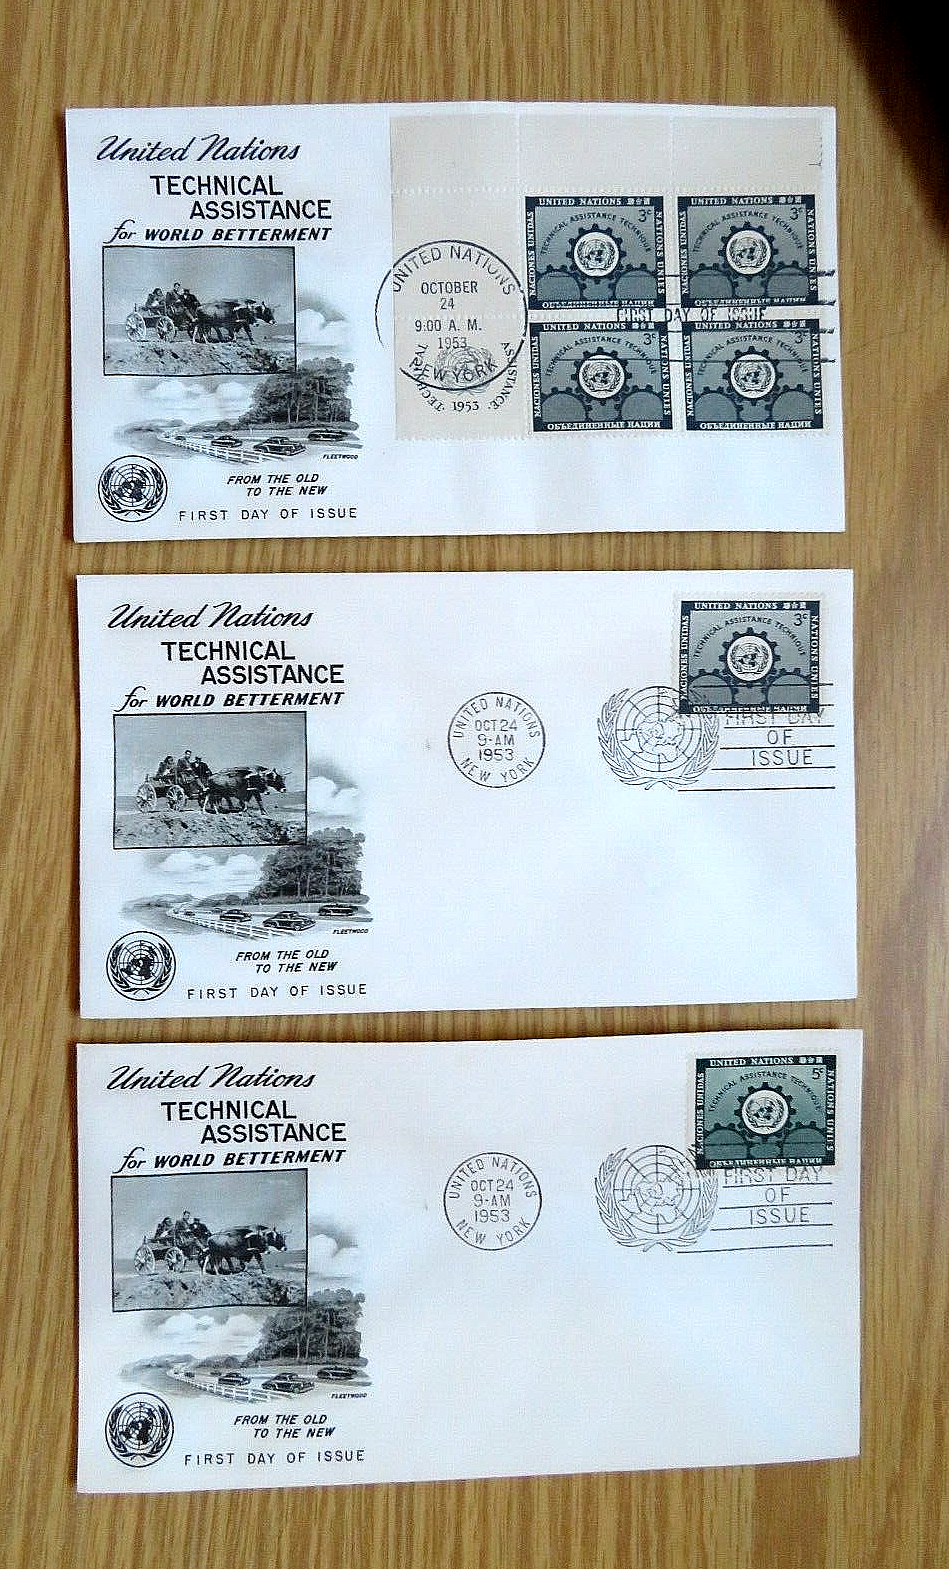 1953 THREE Different UNITED NATIONS TECHNICAL ASSISTANCE COVERS FDC 19 20 (Sheet Без бренда